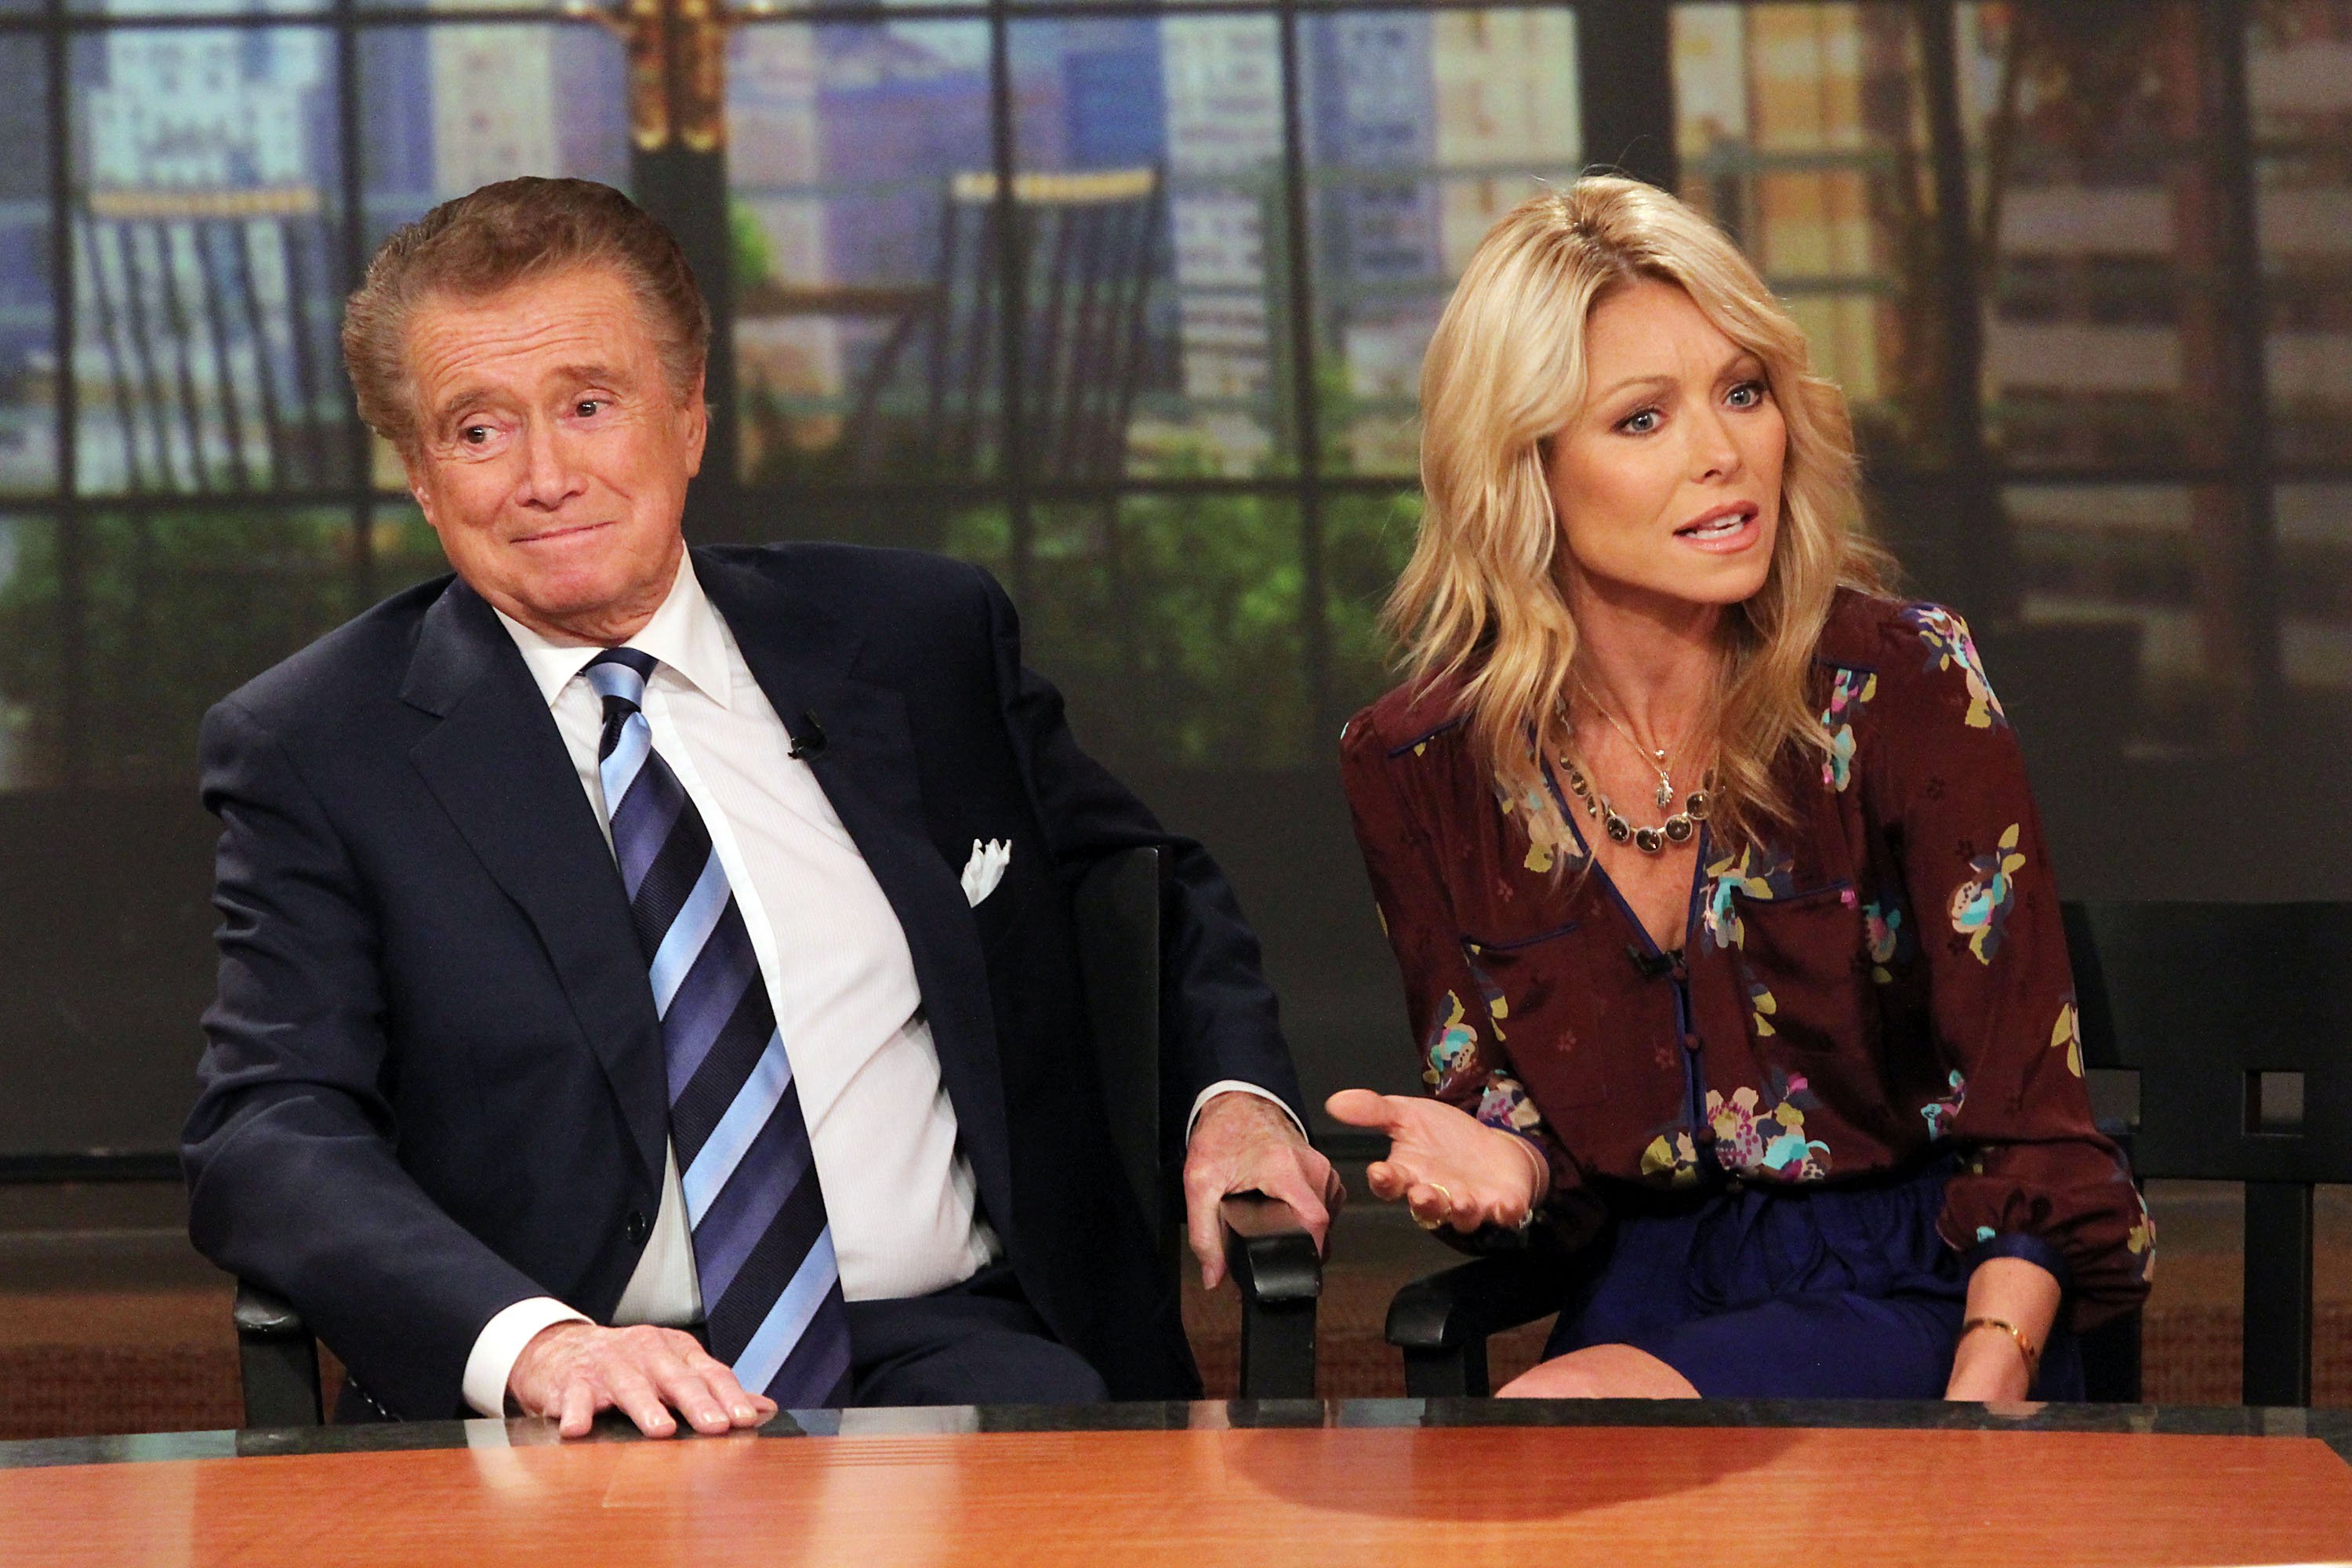 Regis Philbin and Kelly Ripa attend a press conference on Regis's departure from "LIVE! with Regis and Kelly" on November 17, 2011, in New York City. | Source: Getty Images.